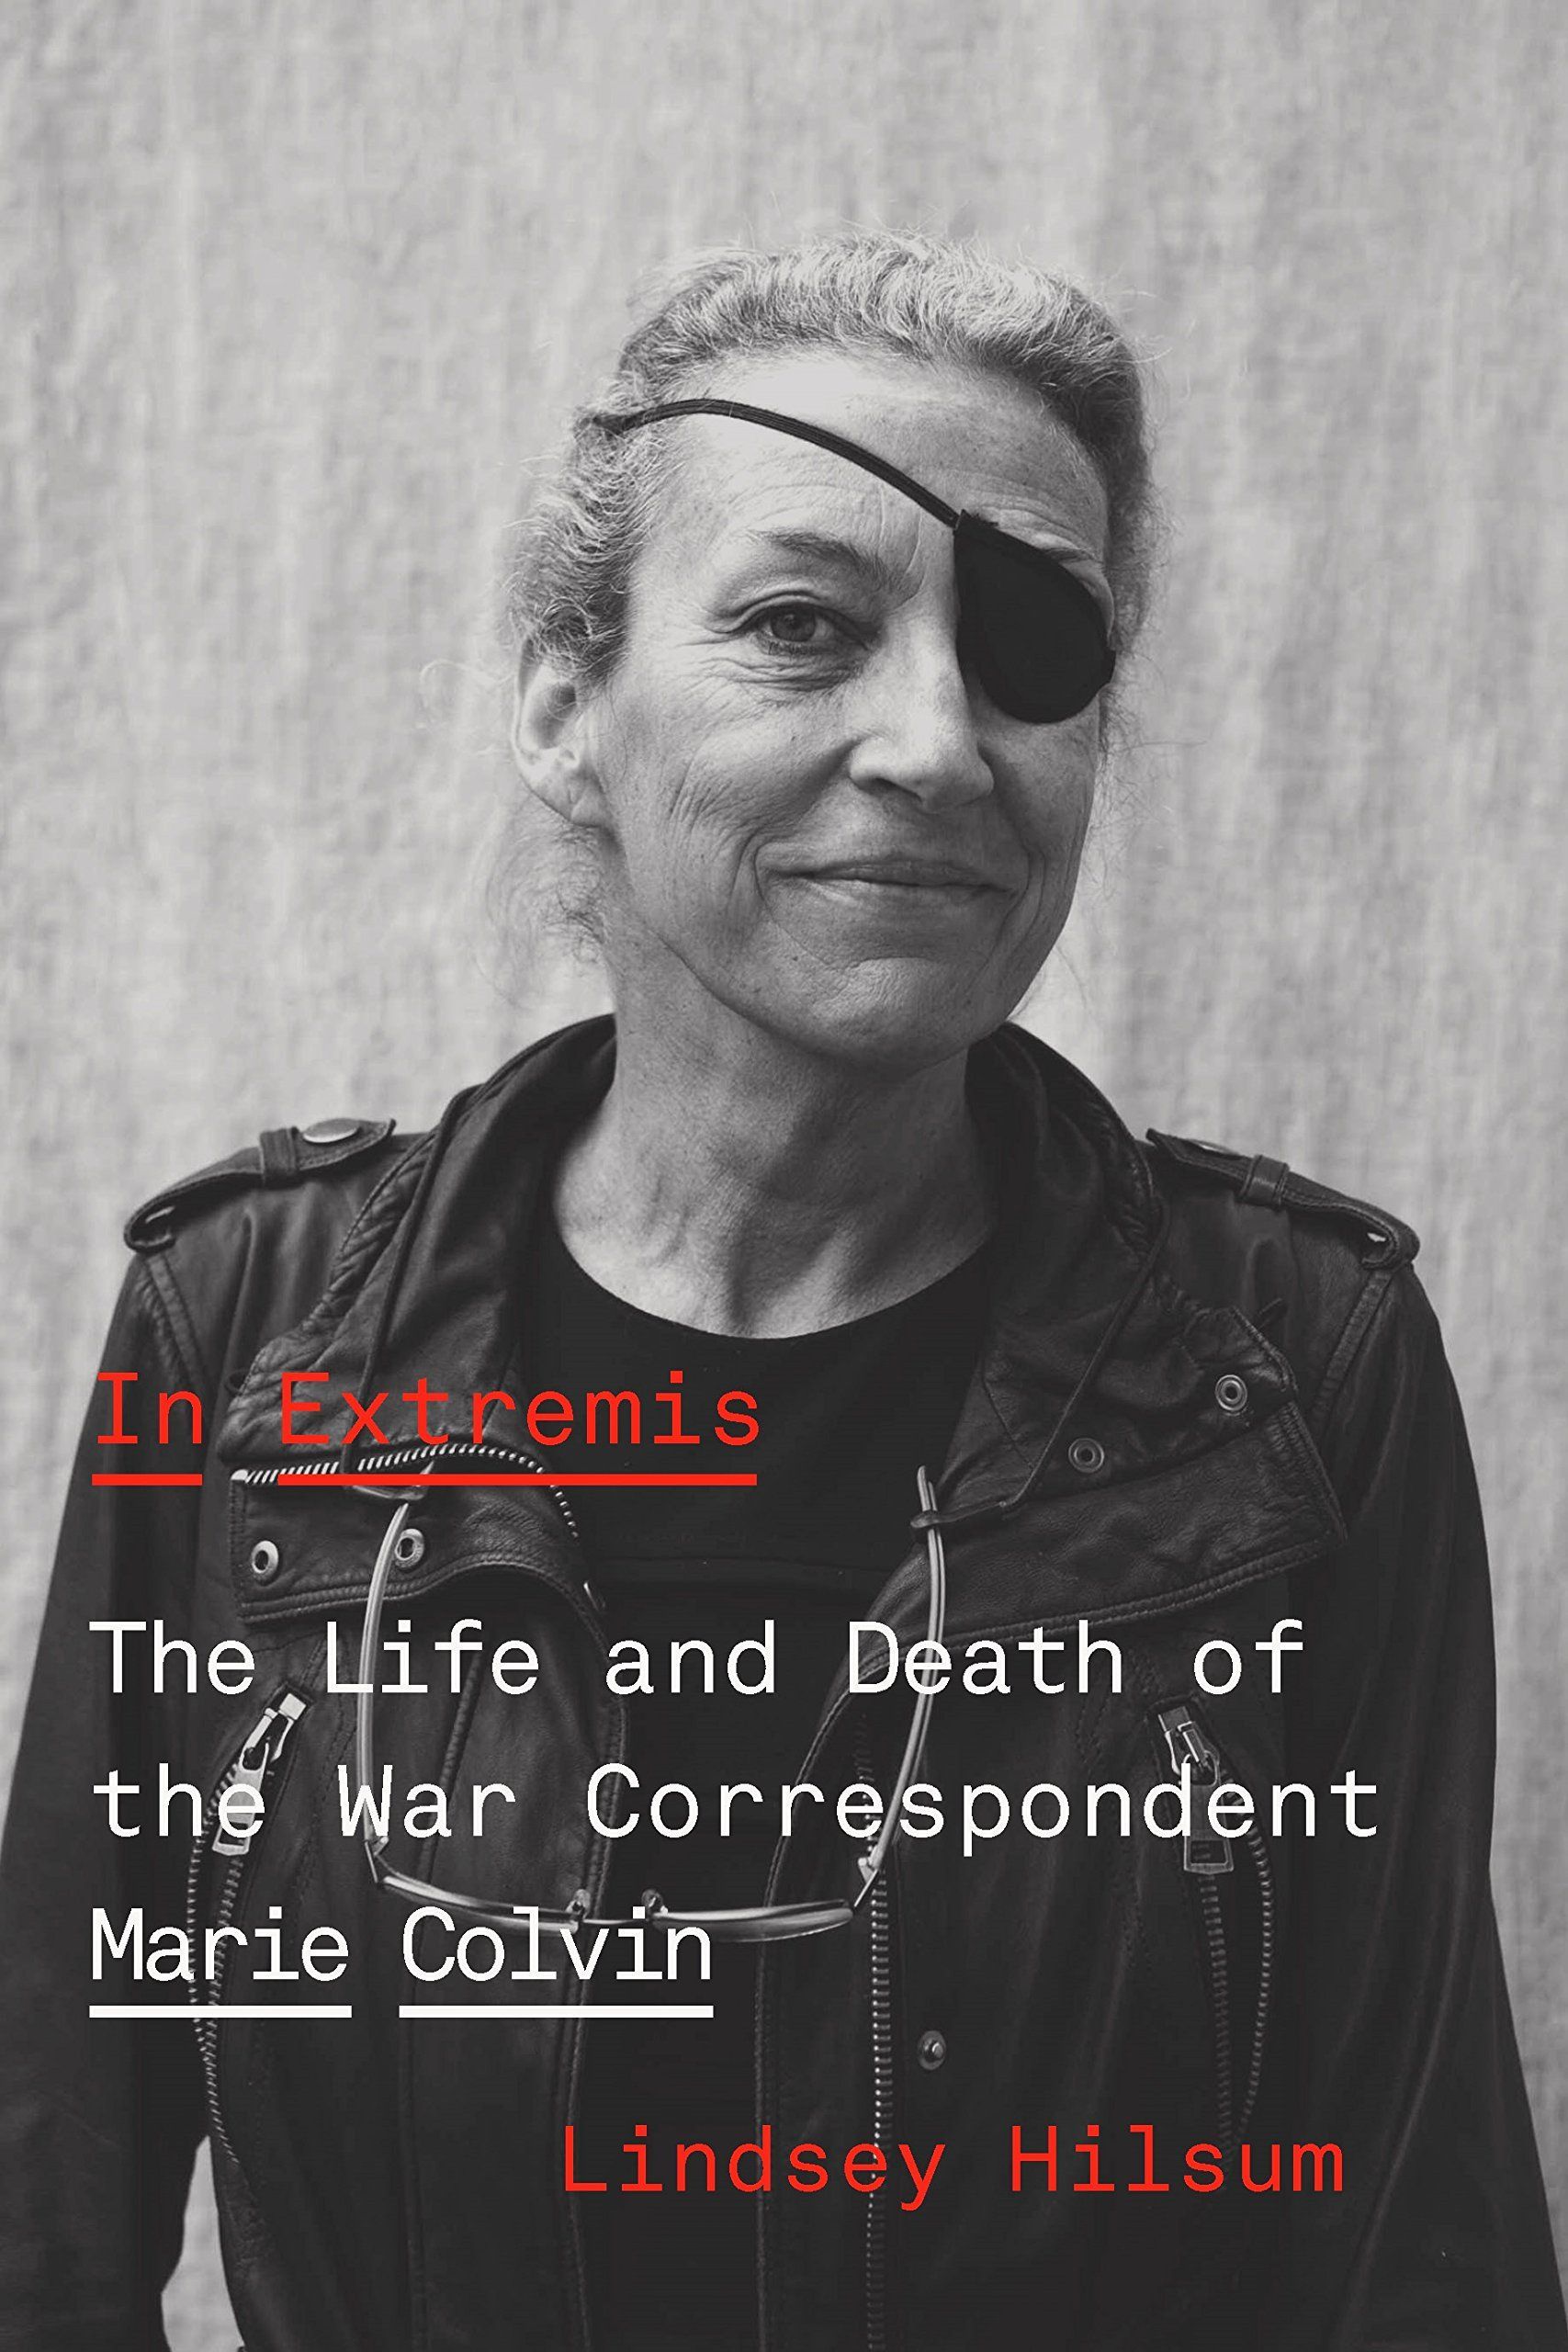 Not a “No Comment” Person: On Lindsey Hilsum’s “In Extremis: The Life and Death of the War Correspondent Marie Colvin”